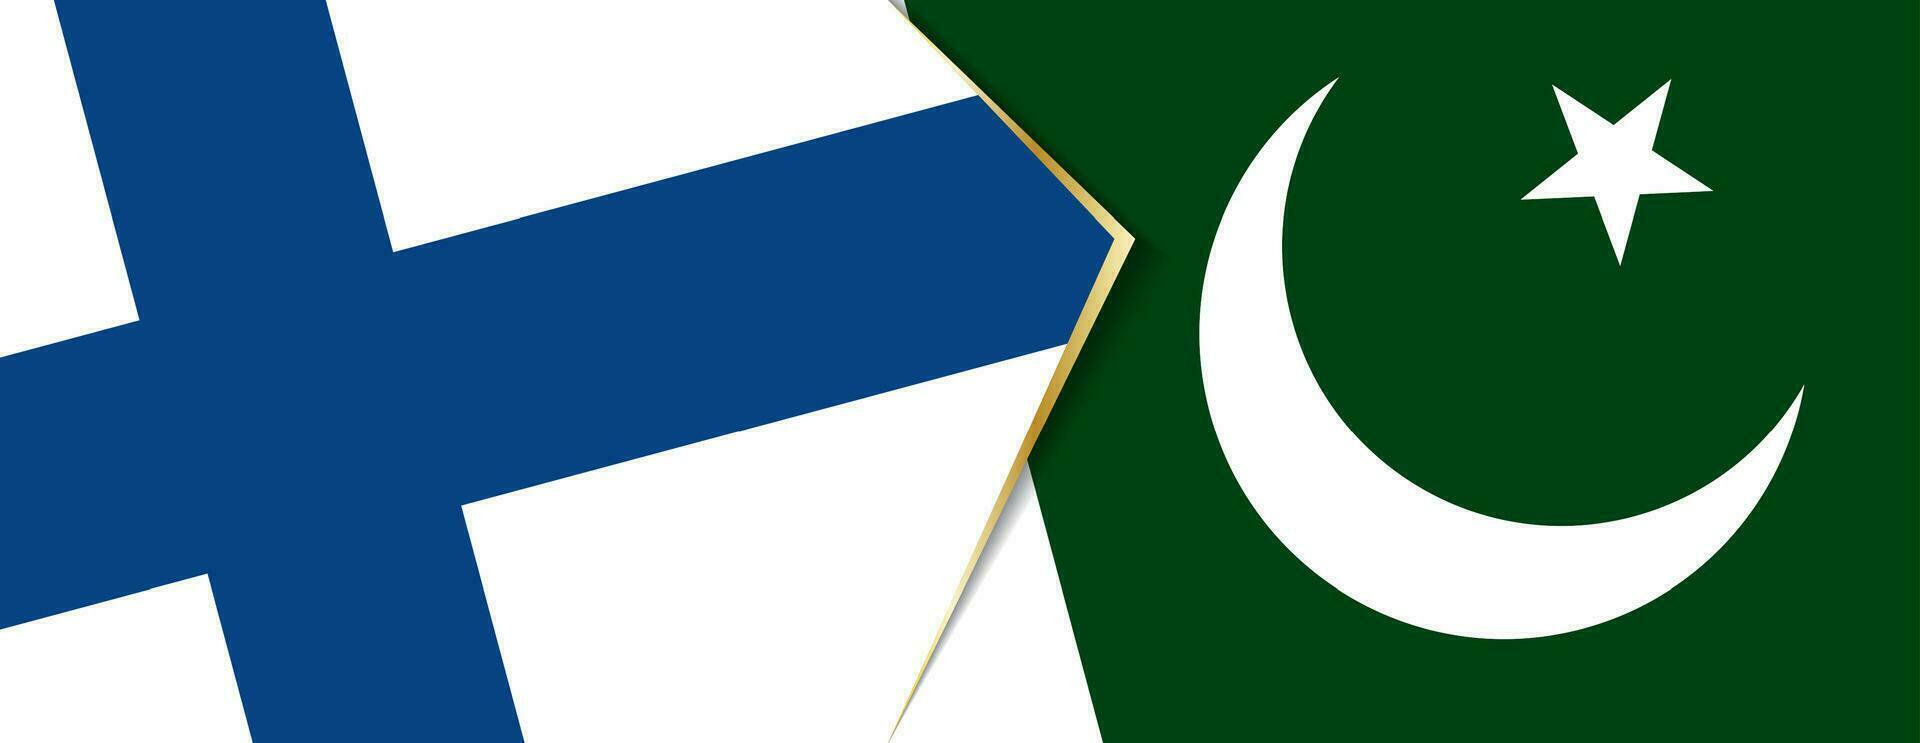 Finland and Pakistan flags, two vector flags.